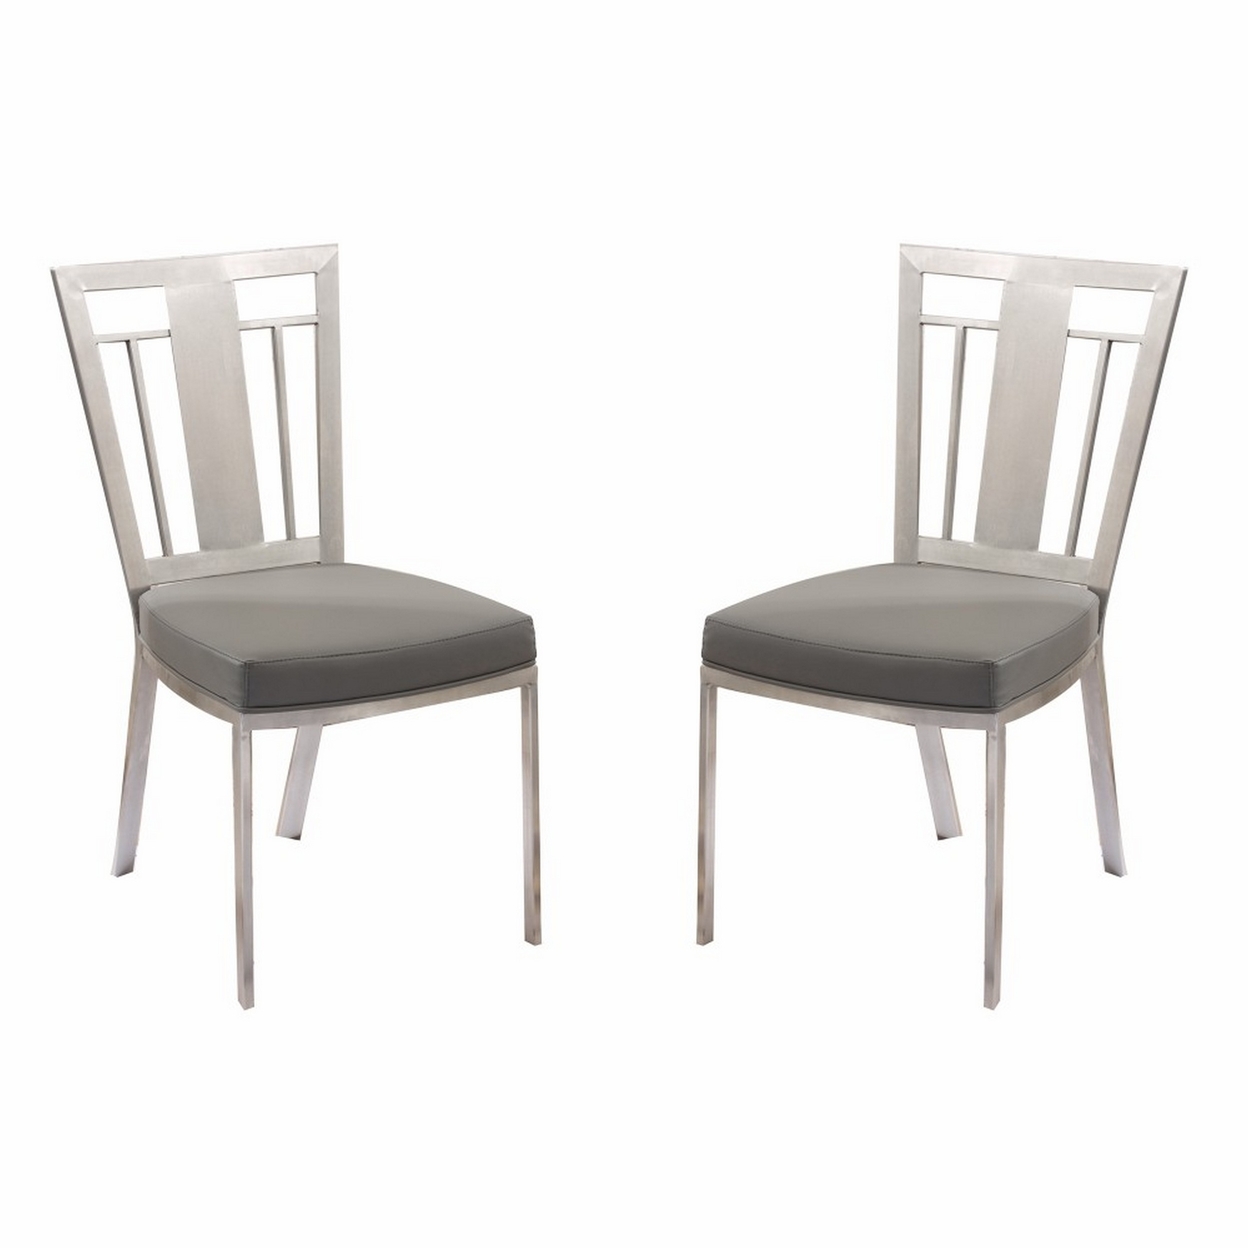 Metal Dining Chair With Leatherette Seat, Set Of 2, Gray And Silver- Saltoro Sherpi